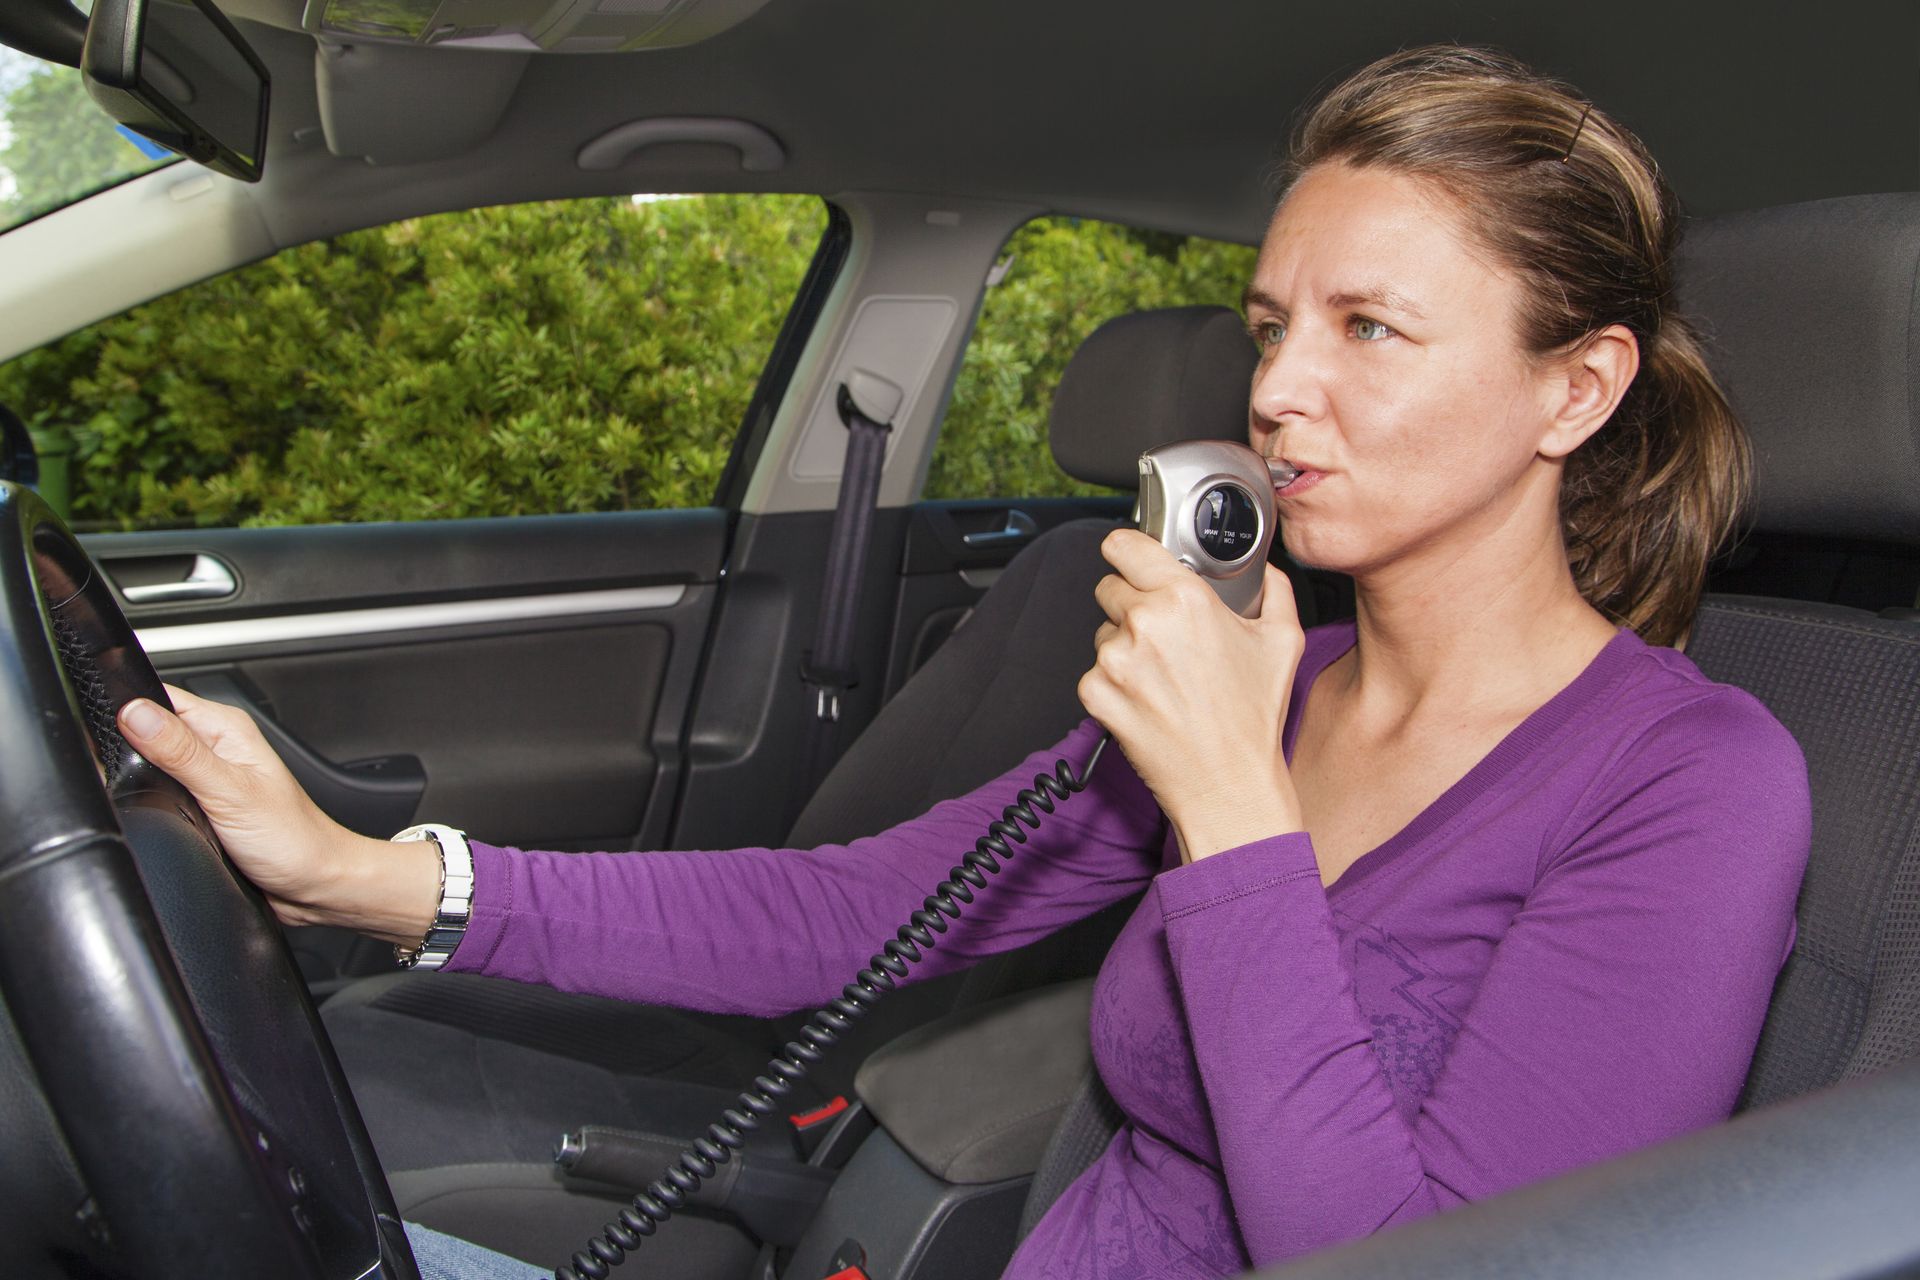 A woman in a purple shirt sitting in her car blowing into an interlock device